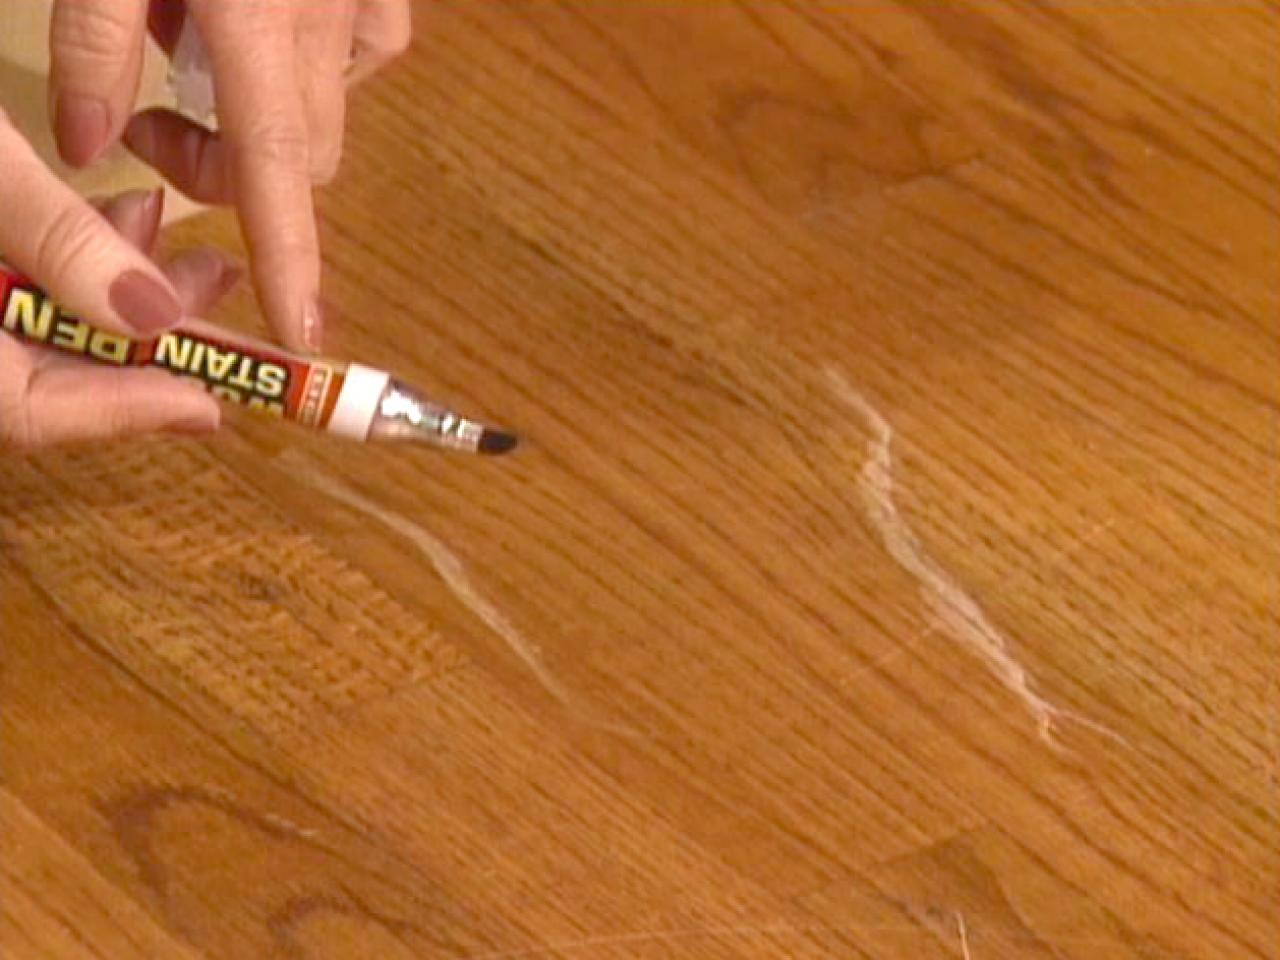 How To Touch Up Wood Floors Tos Diy, Removing Scuff Marks From Hardwood Floors